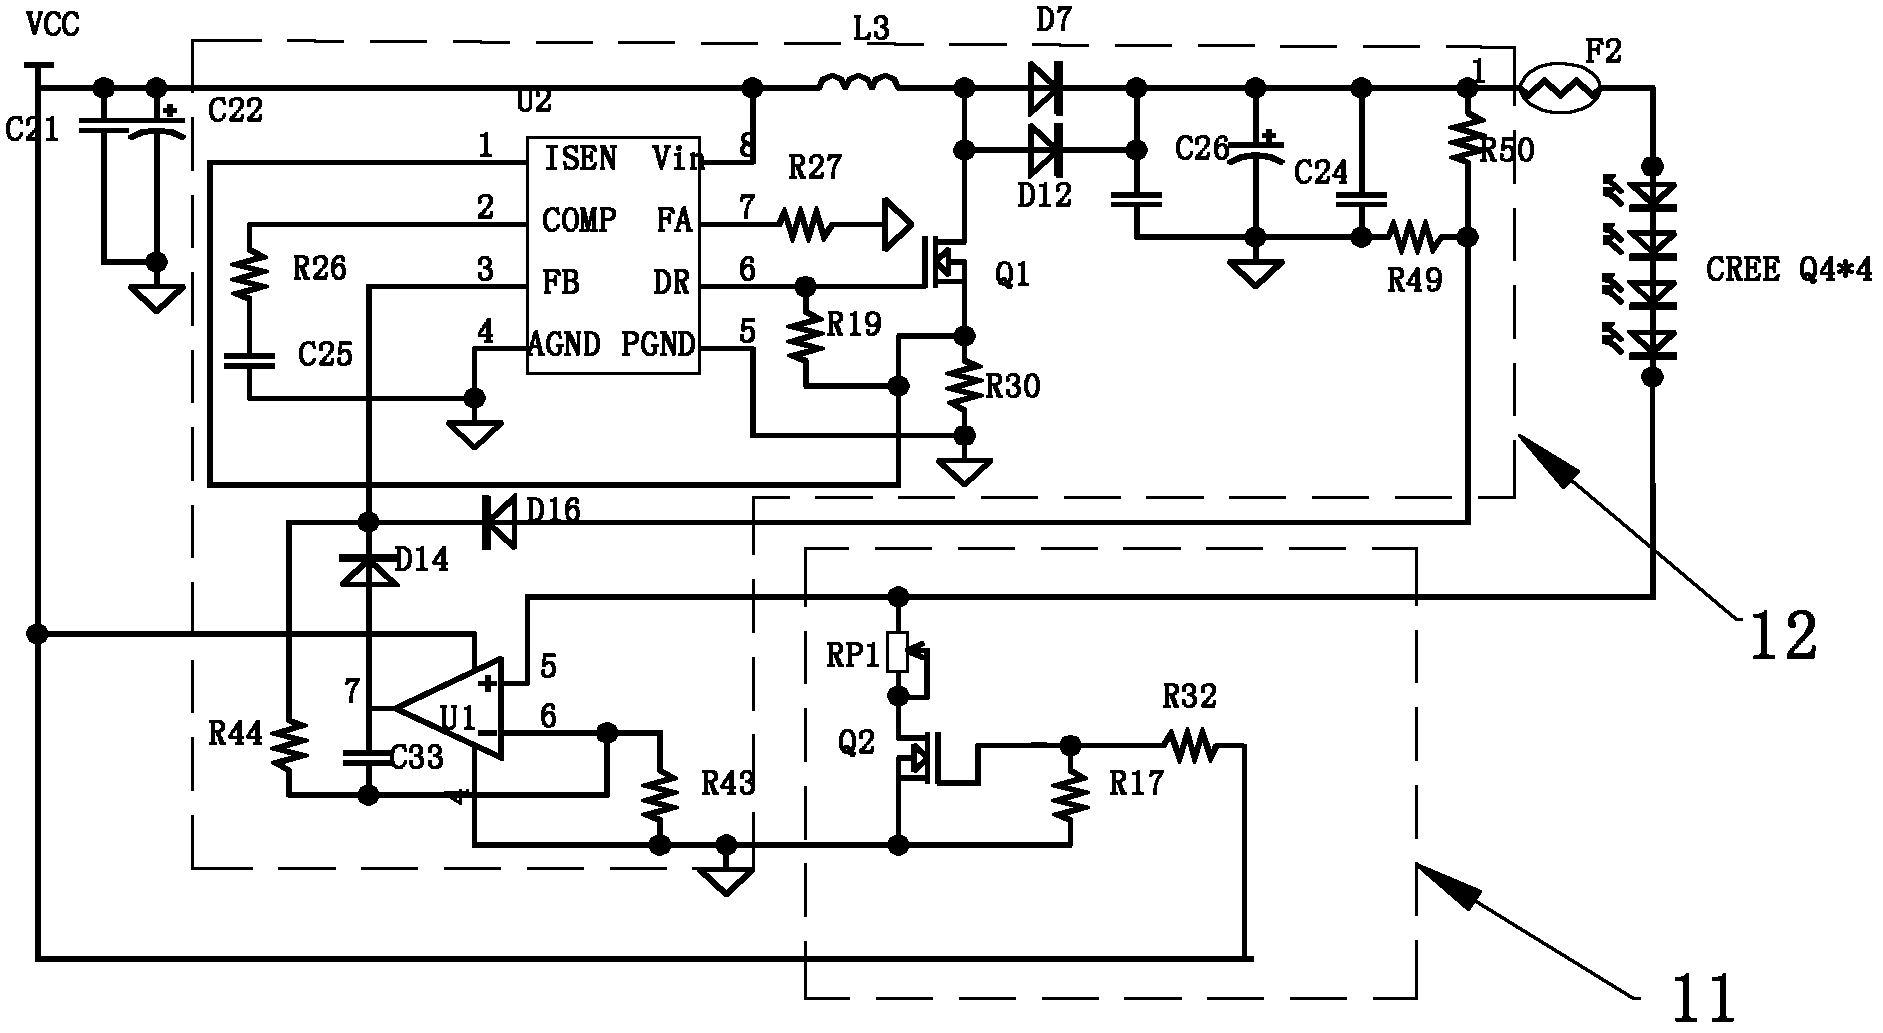 LED dimming circuit and LED lamp